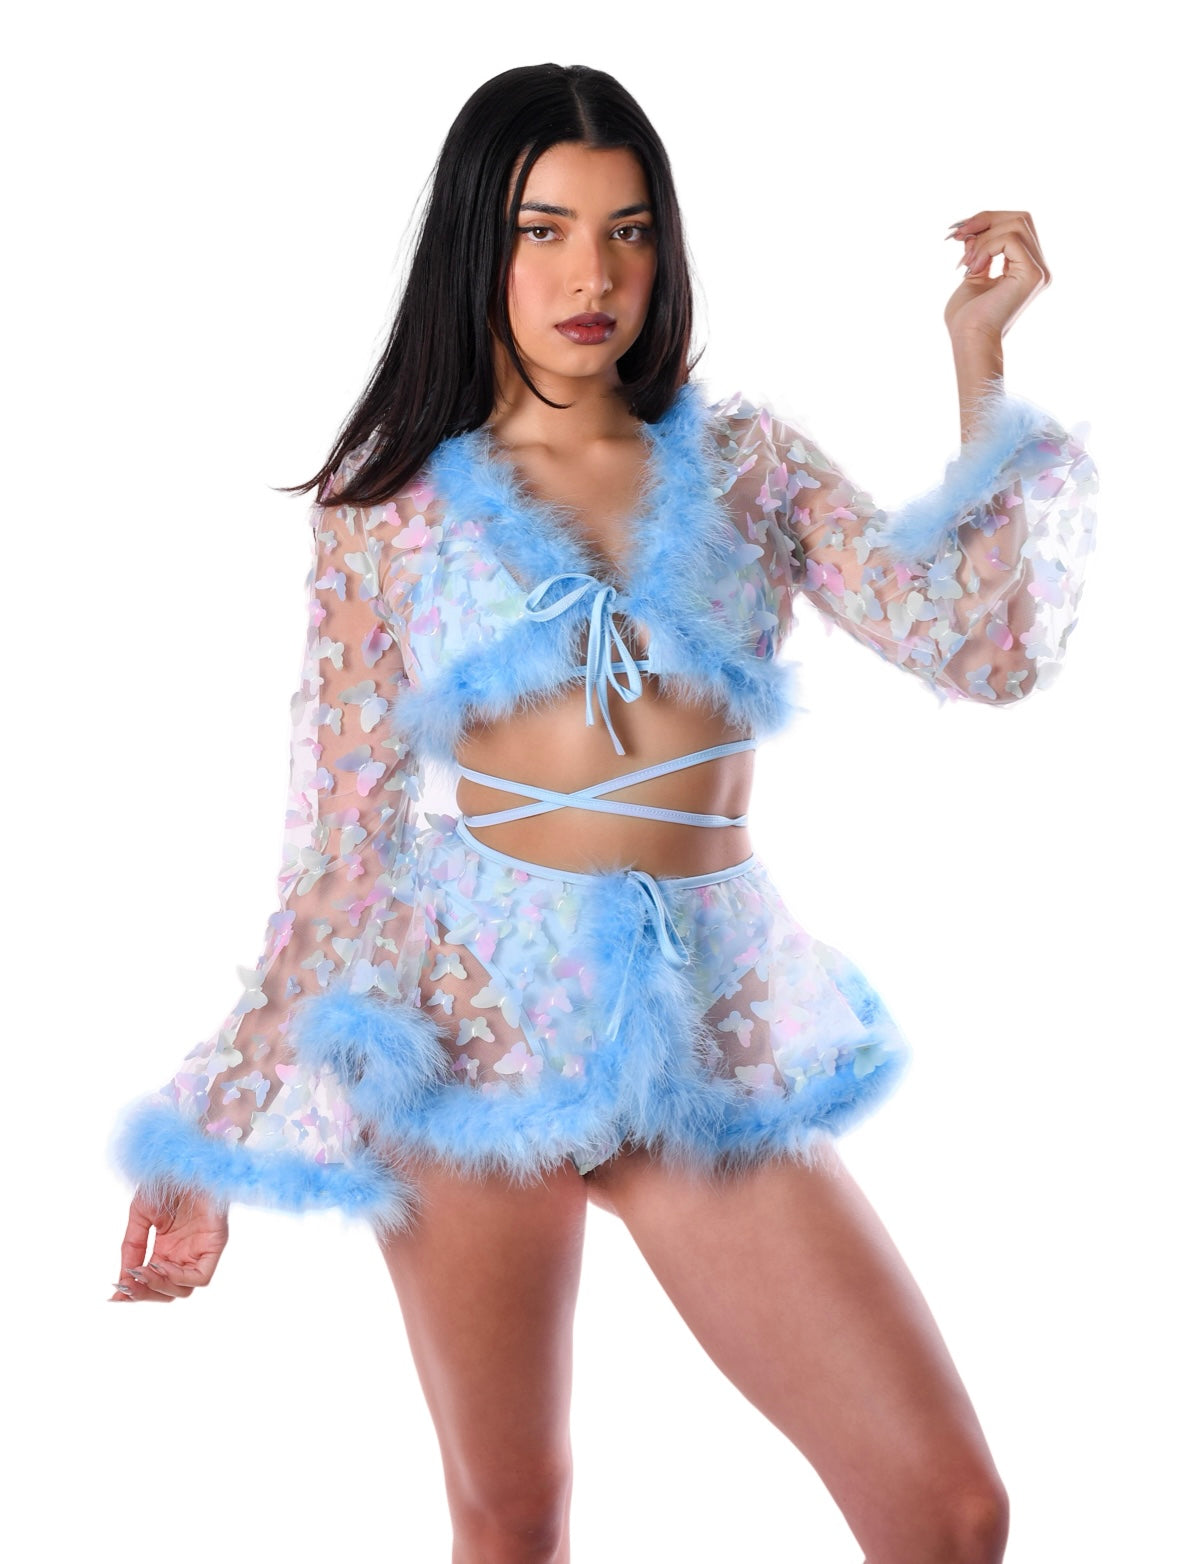 FULL OUTFIT - Turquoise Gem Carnival Set Rave clothes,rave outfits,edc –  THE LUMI SHOP